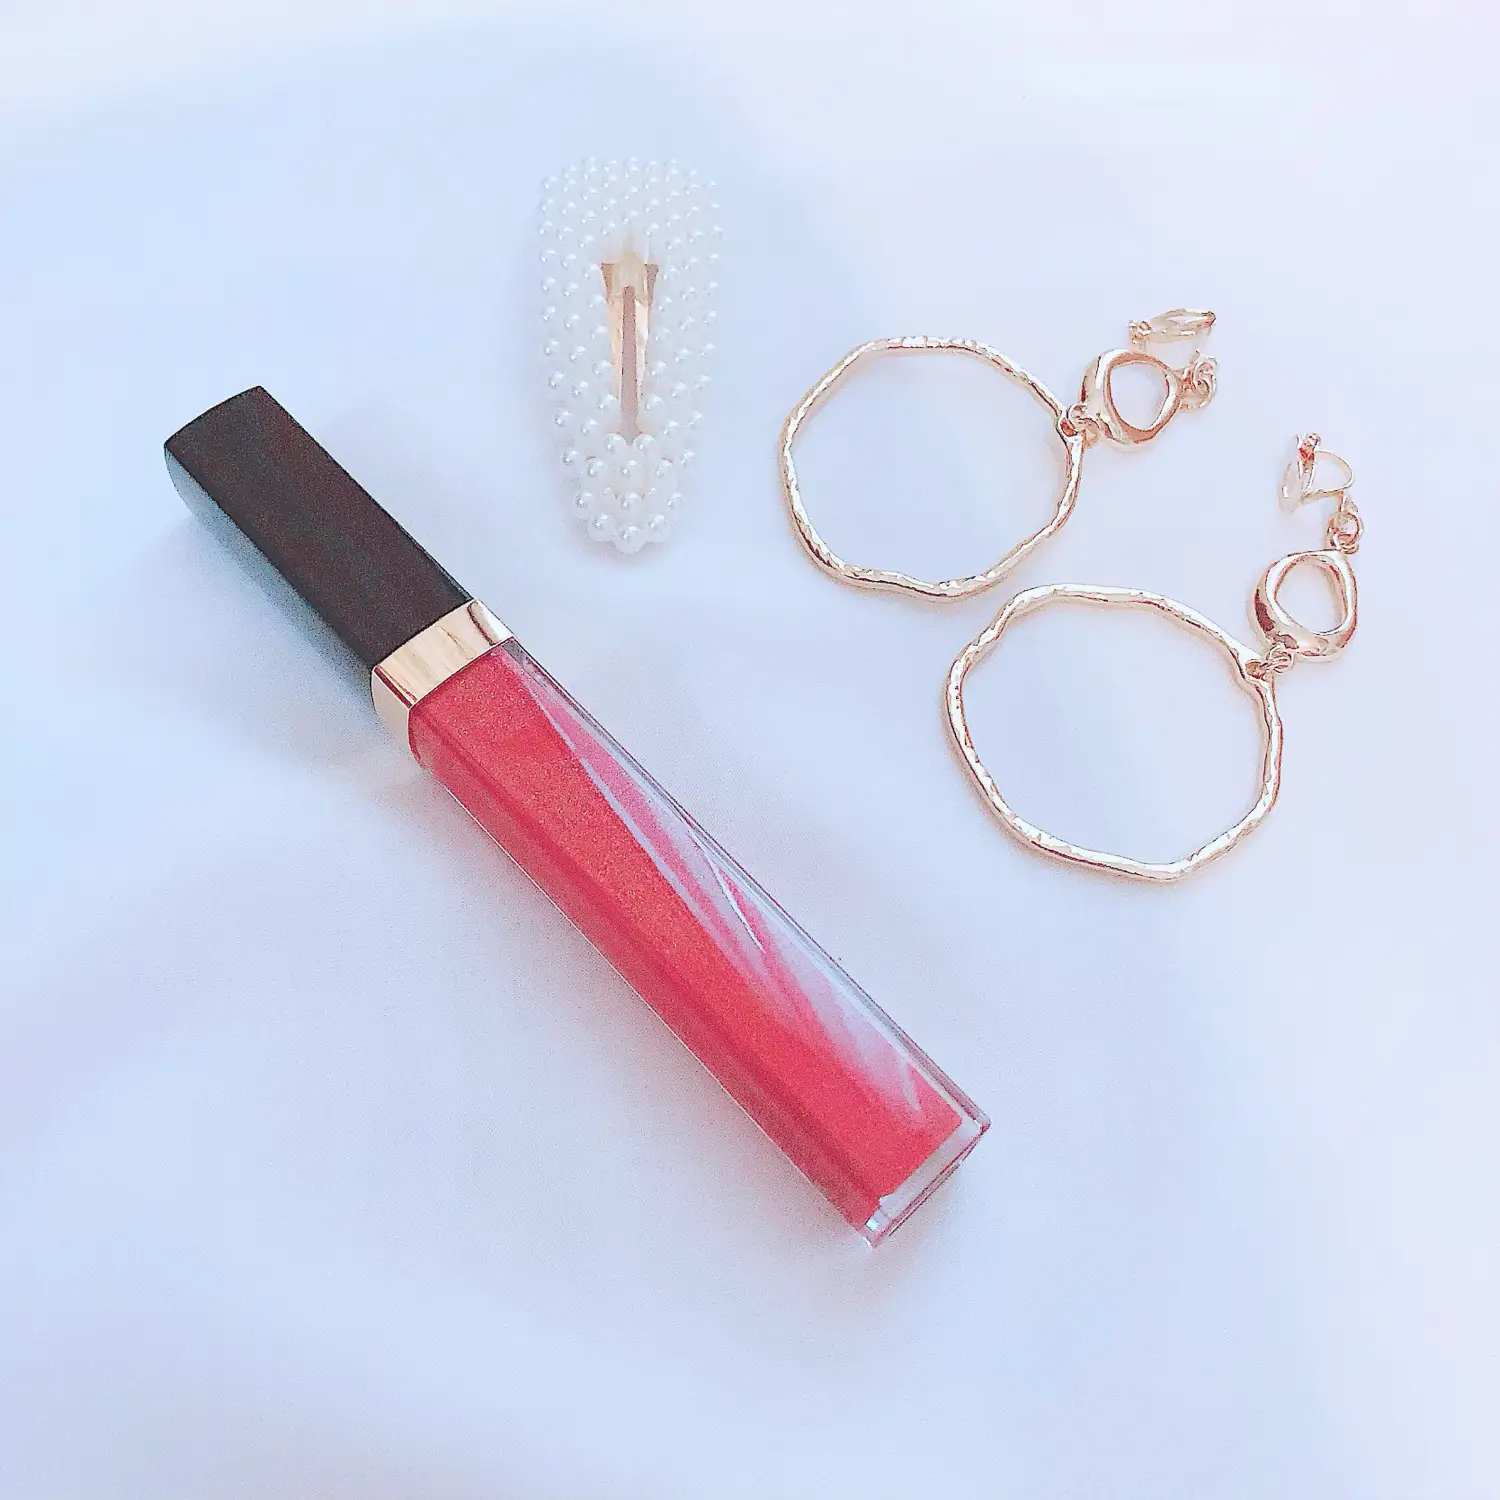 Recommended by Brevet Natsu] CHANEL Rouge Coco Gloss is cute ♡, Gallery  posted by はらなかしおり